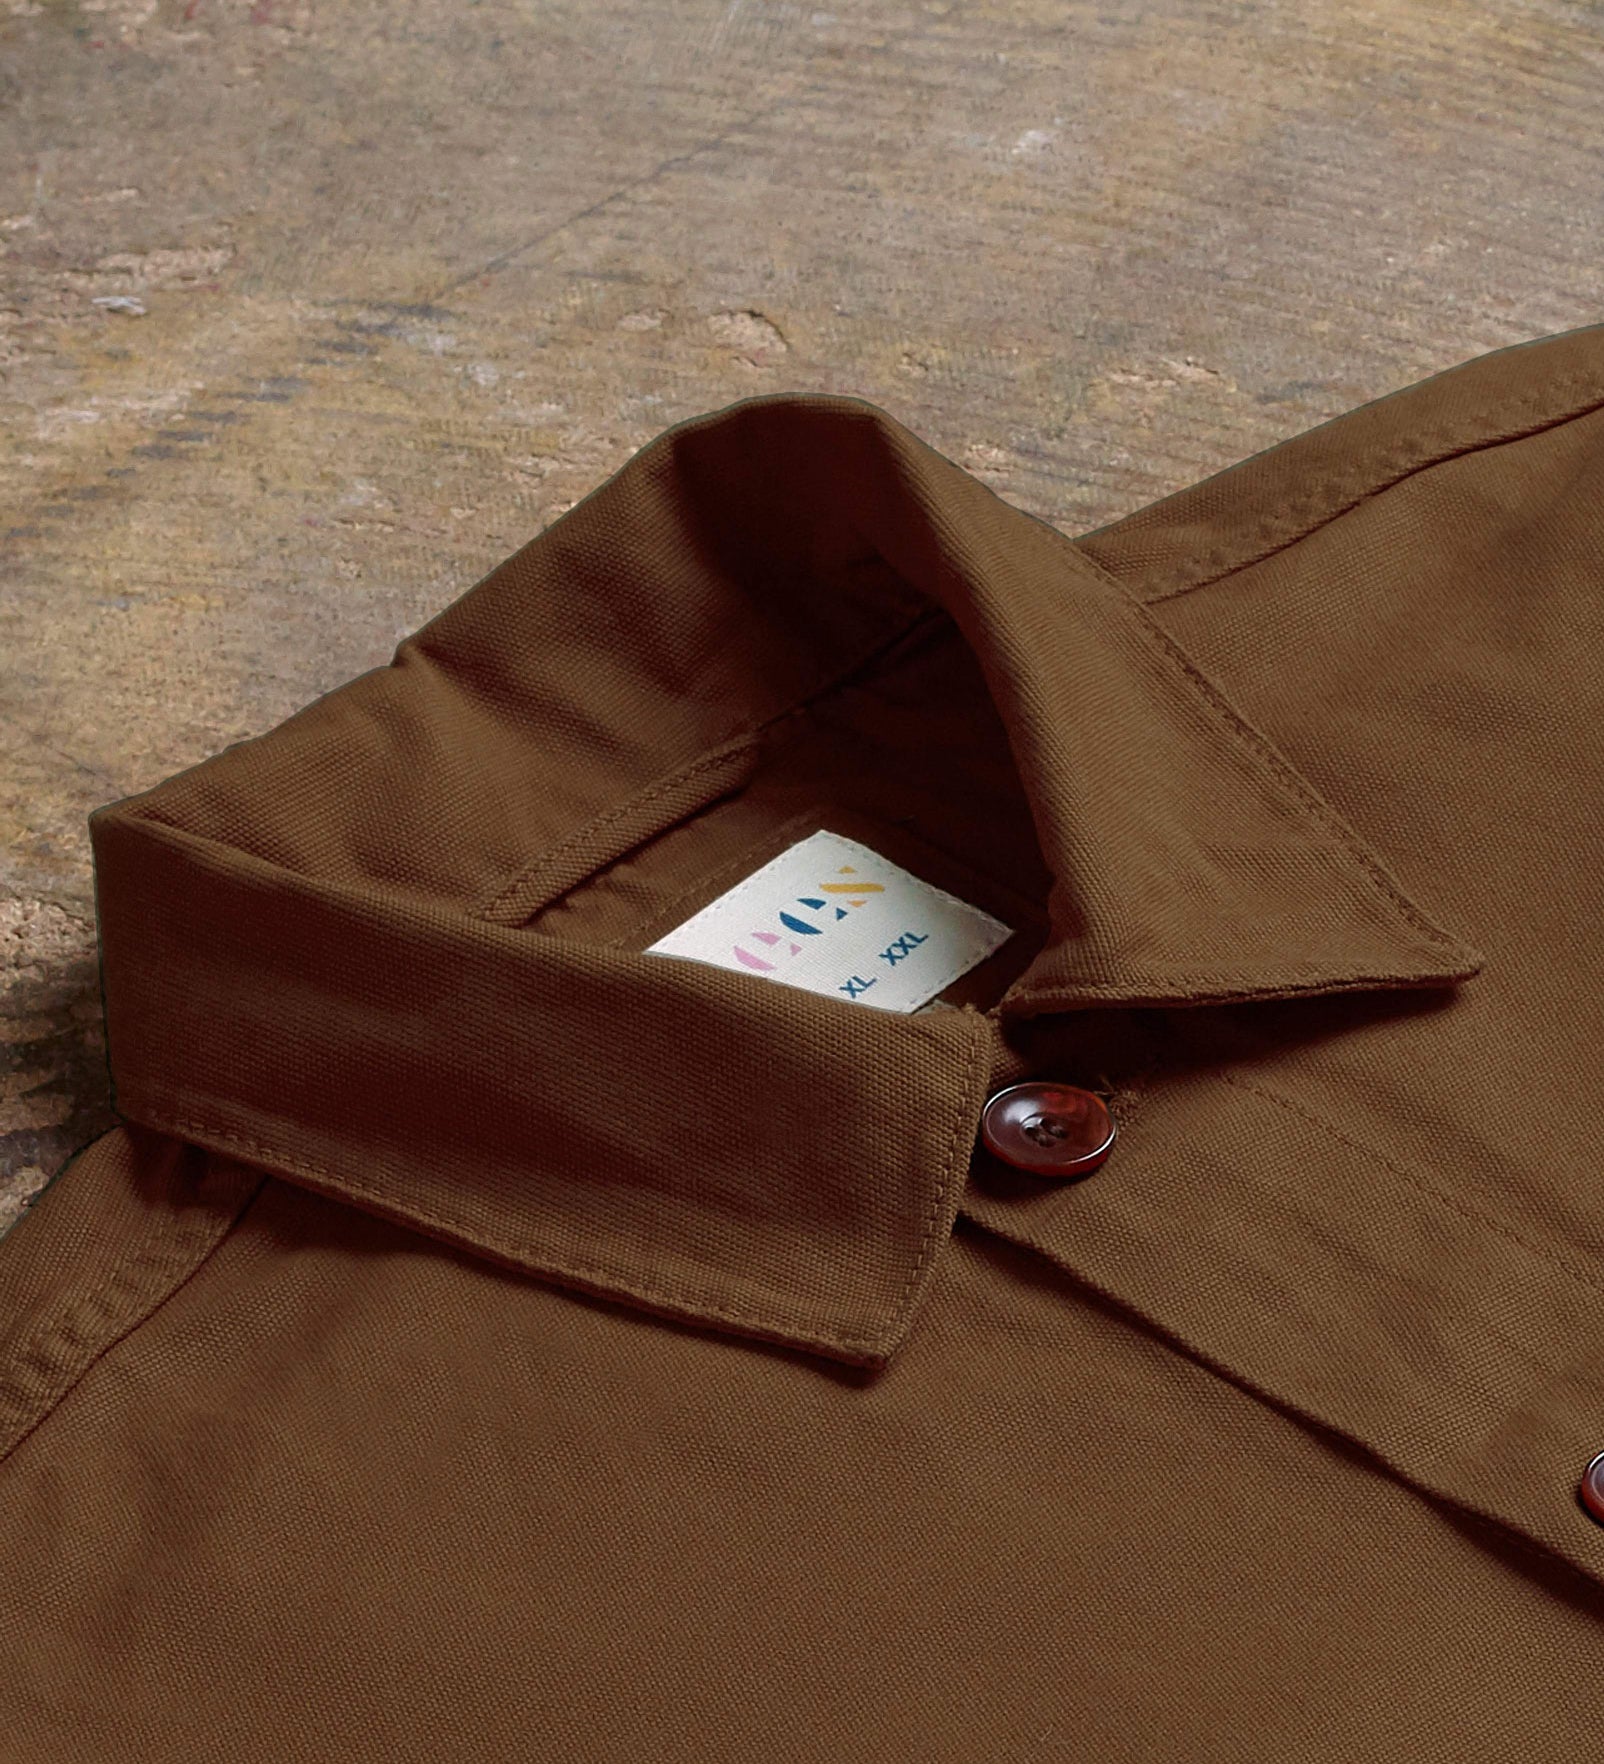 Angled flat view of the collar of the brown #3001 Uskees overshirt showing weave of organic cotton and Uskees branding label.